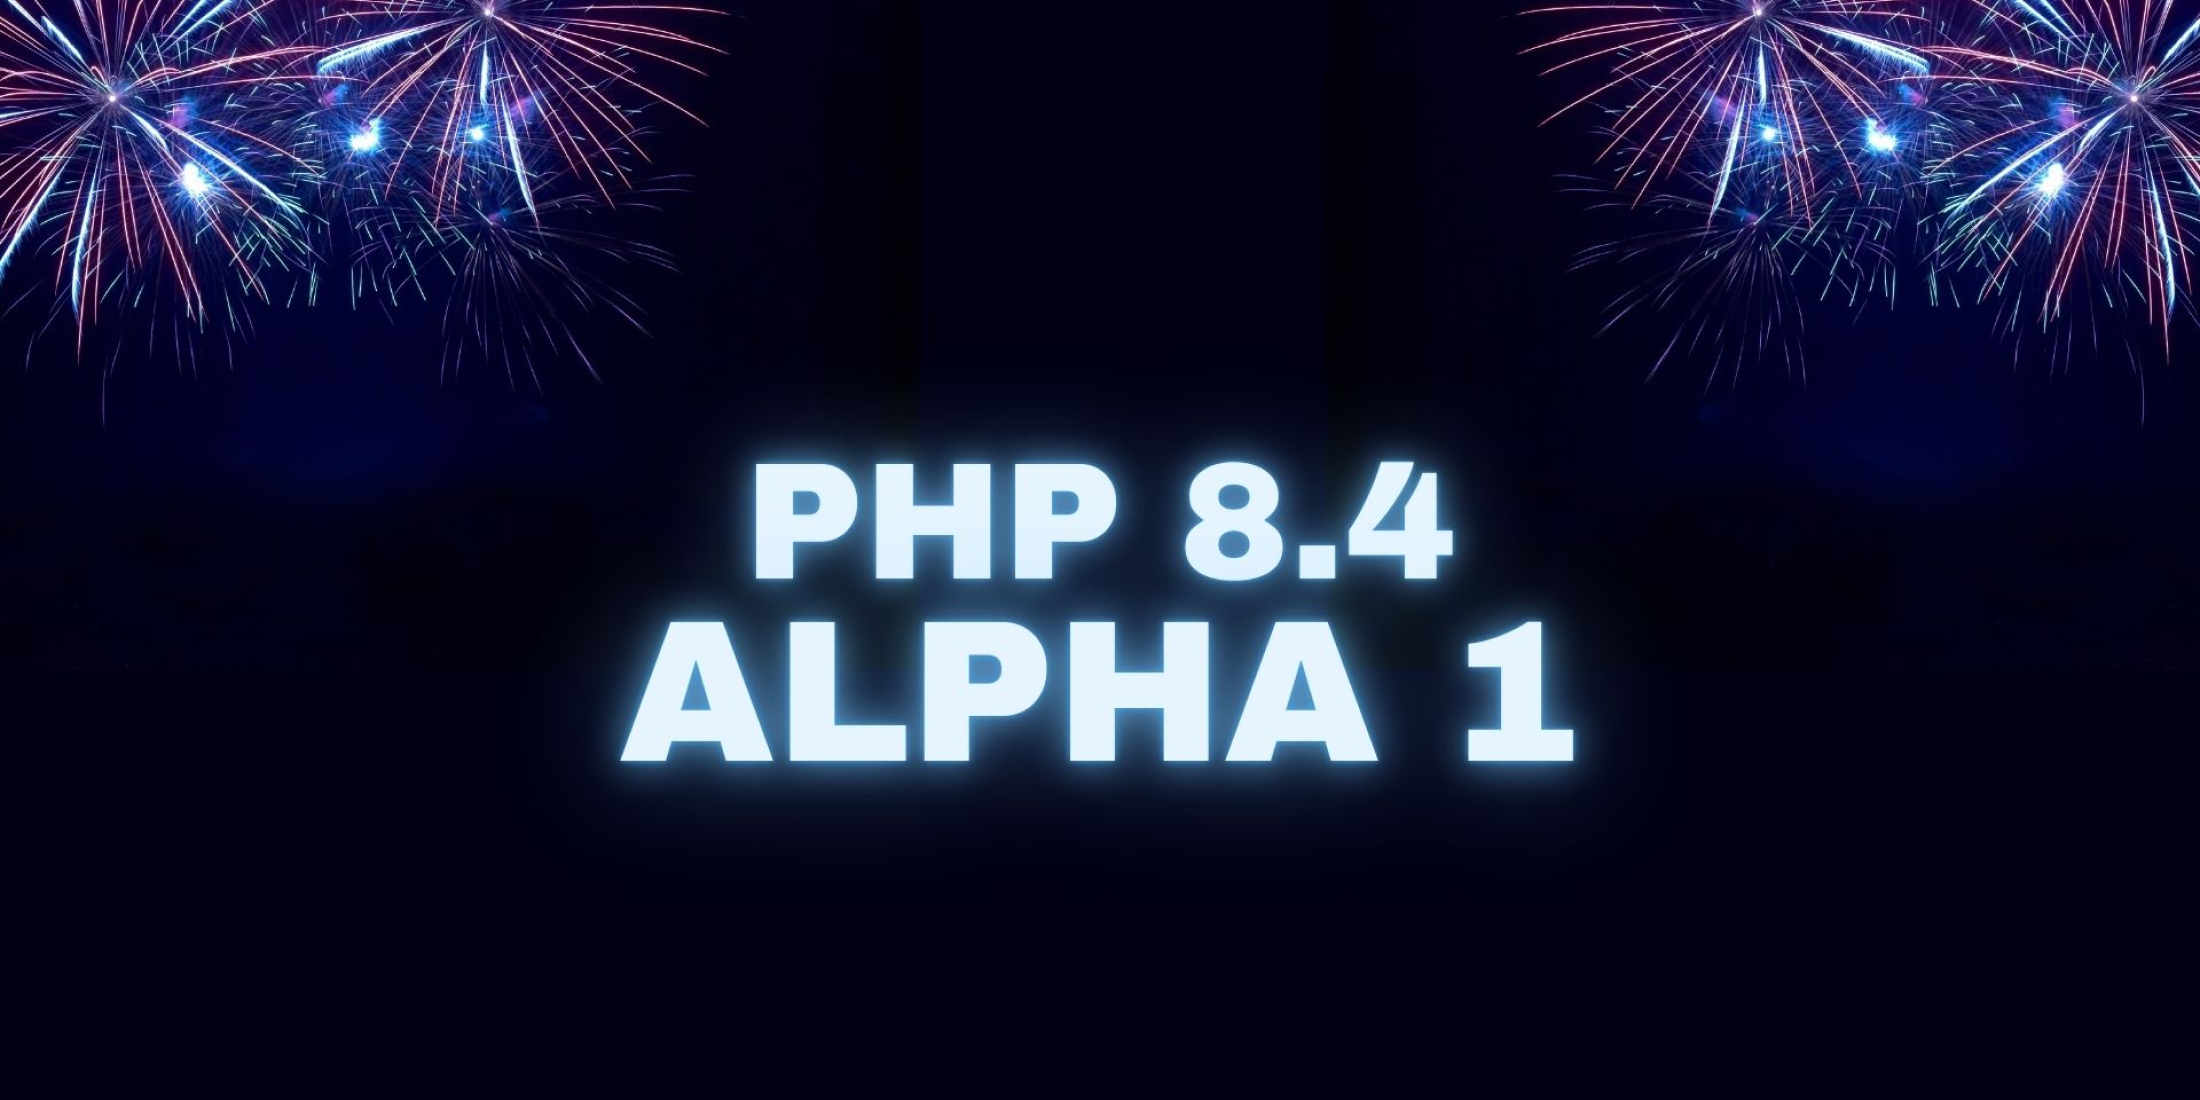 PHP 8.4 Alpha 1 is now out!